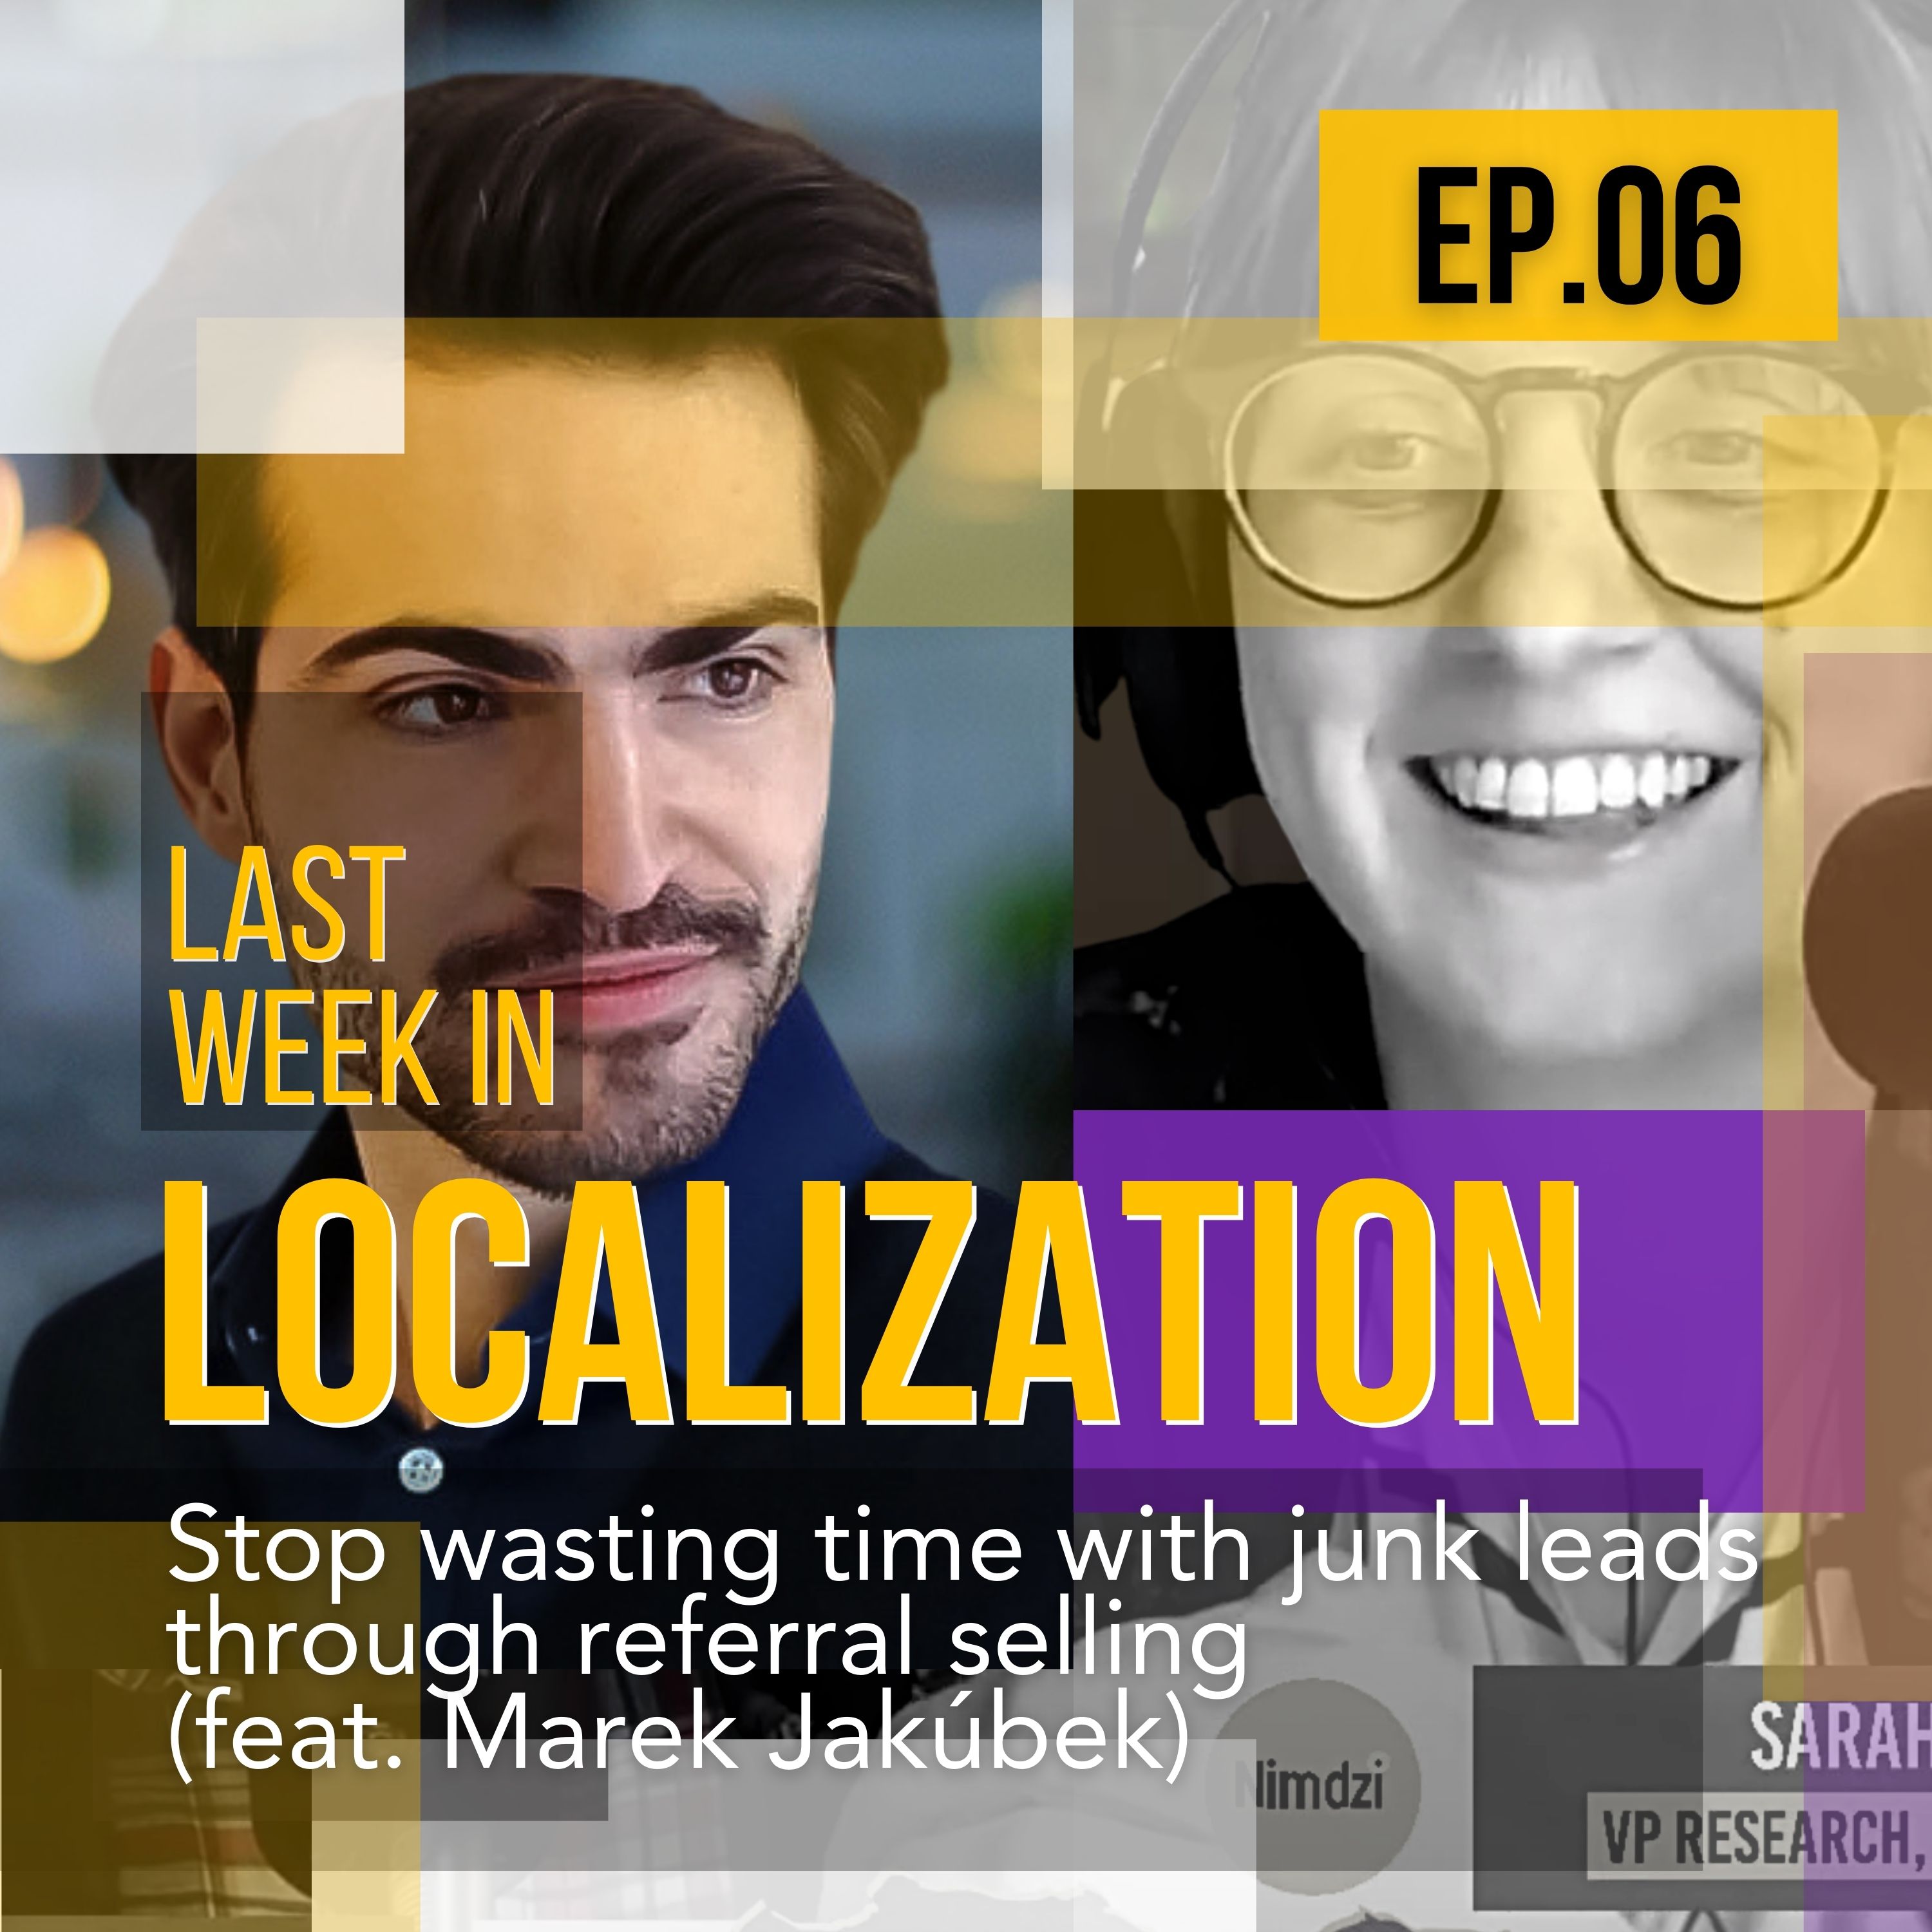 Stop wasting time with junk leads through referral selling (feat. Marek Jakúbek)